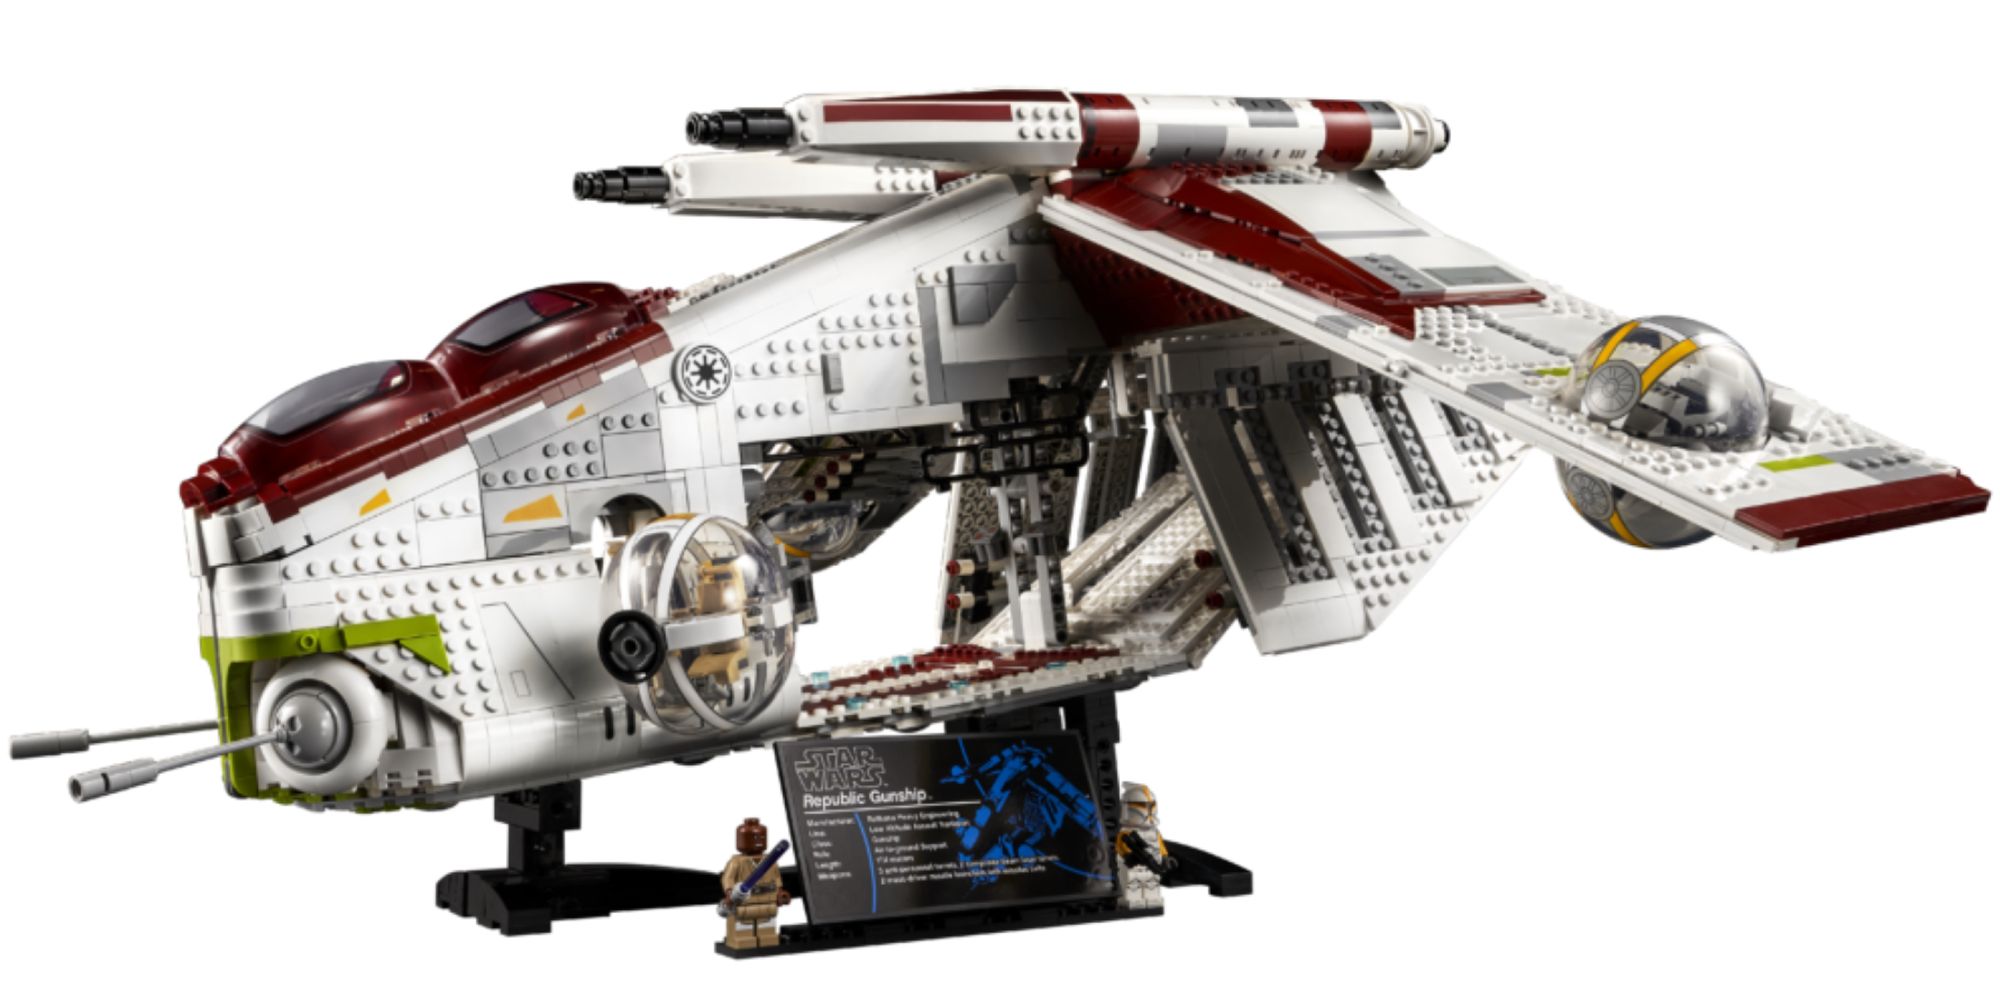 LEGO has uncovered image for the latest expansion to their Star Wars Ultimate Collector's Series, the Republic Gunship